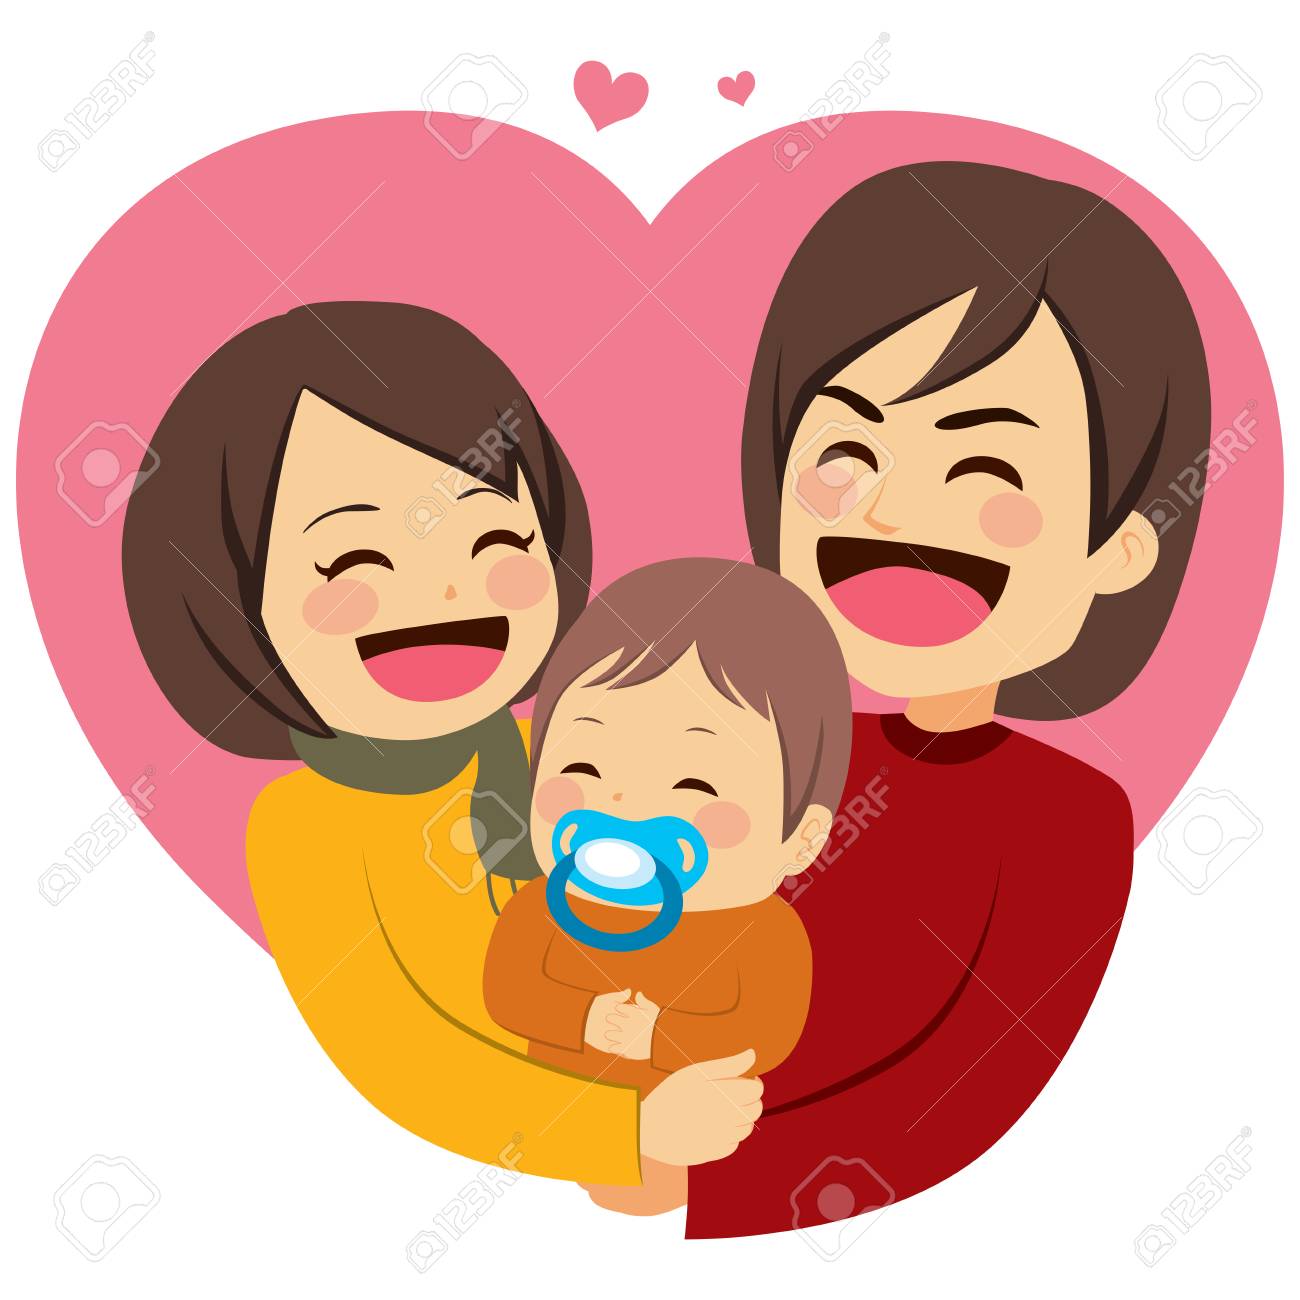 Free Family Clipart hug, Download Free Clip Art on Owips